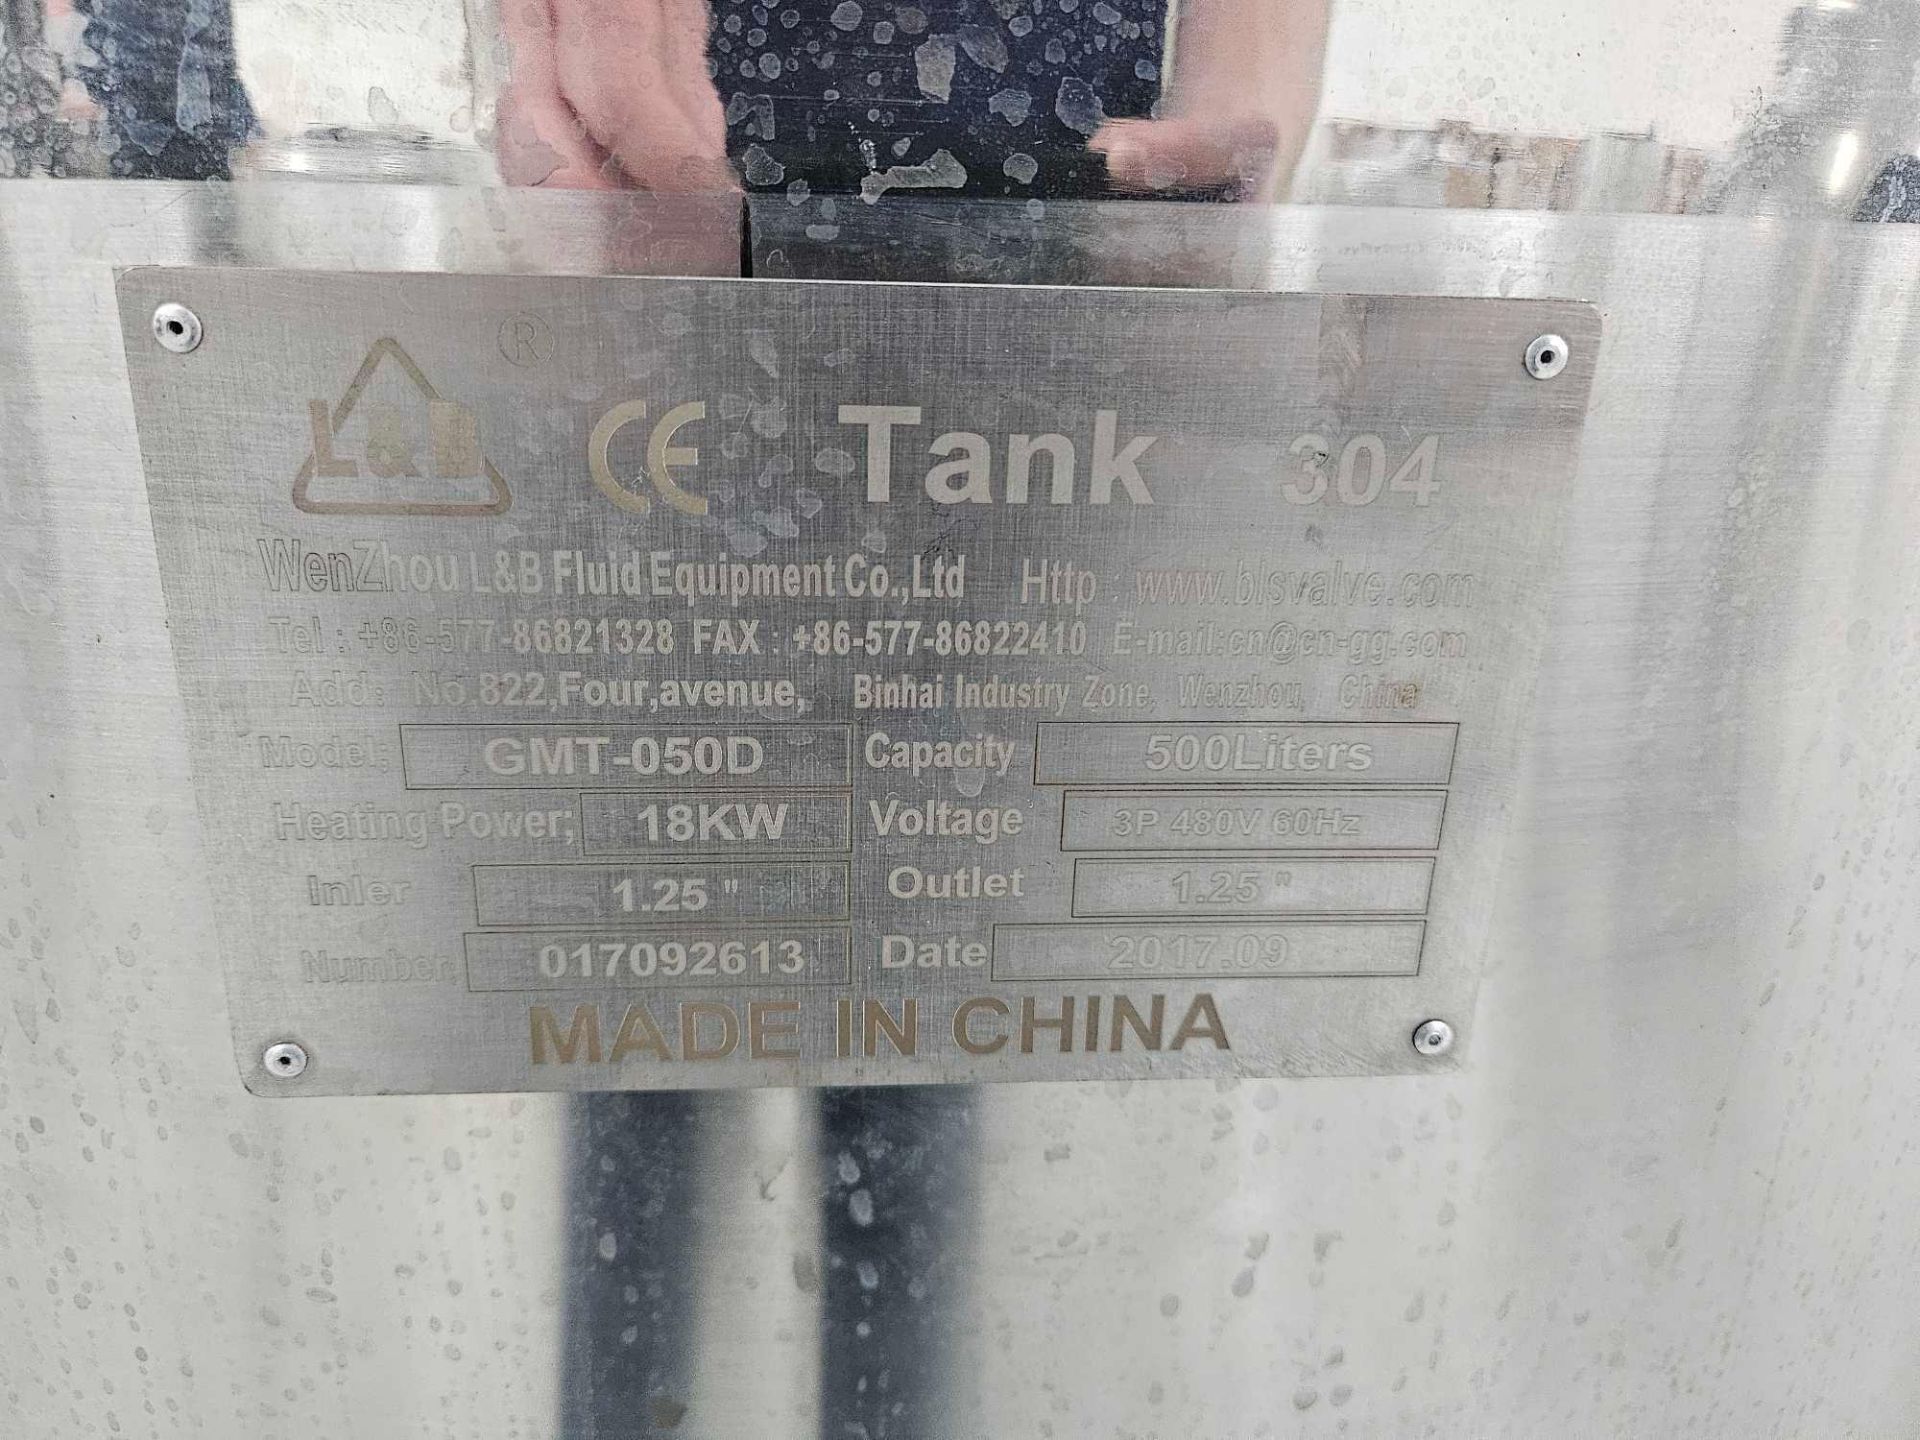 Stainless Steel Jacketed Tank - Image 6 of 6